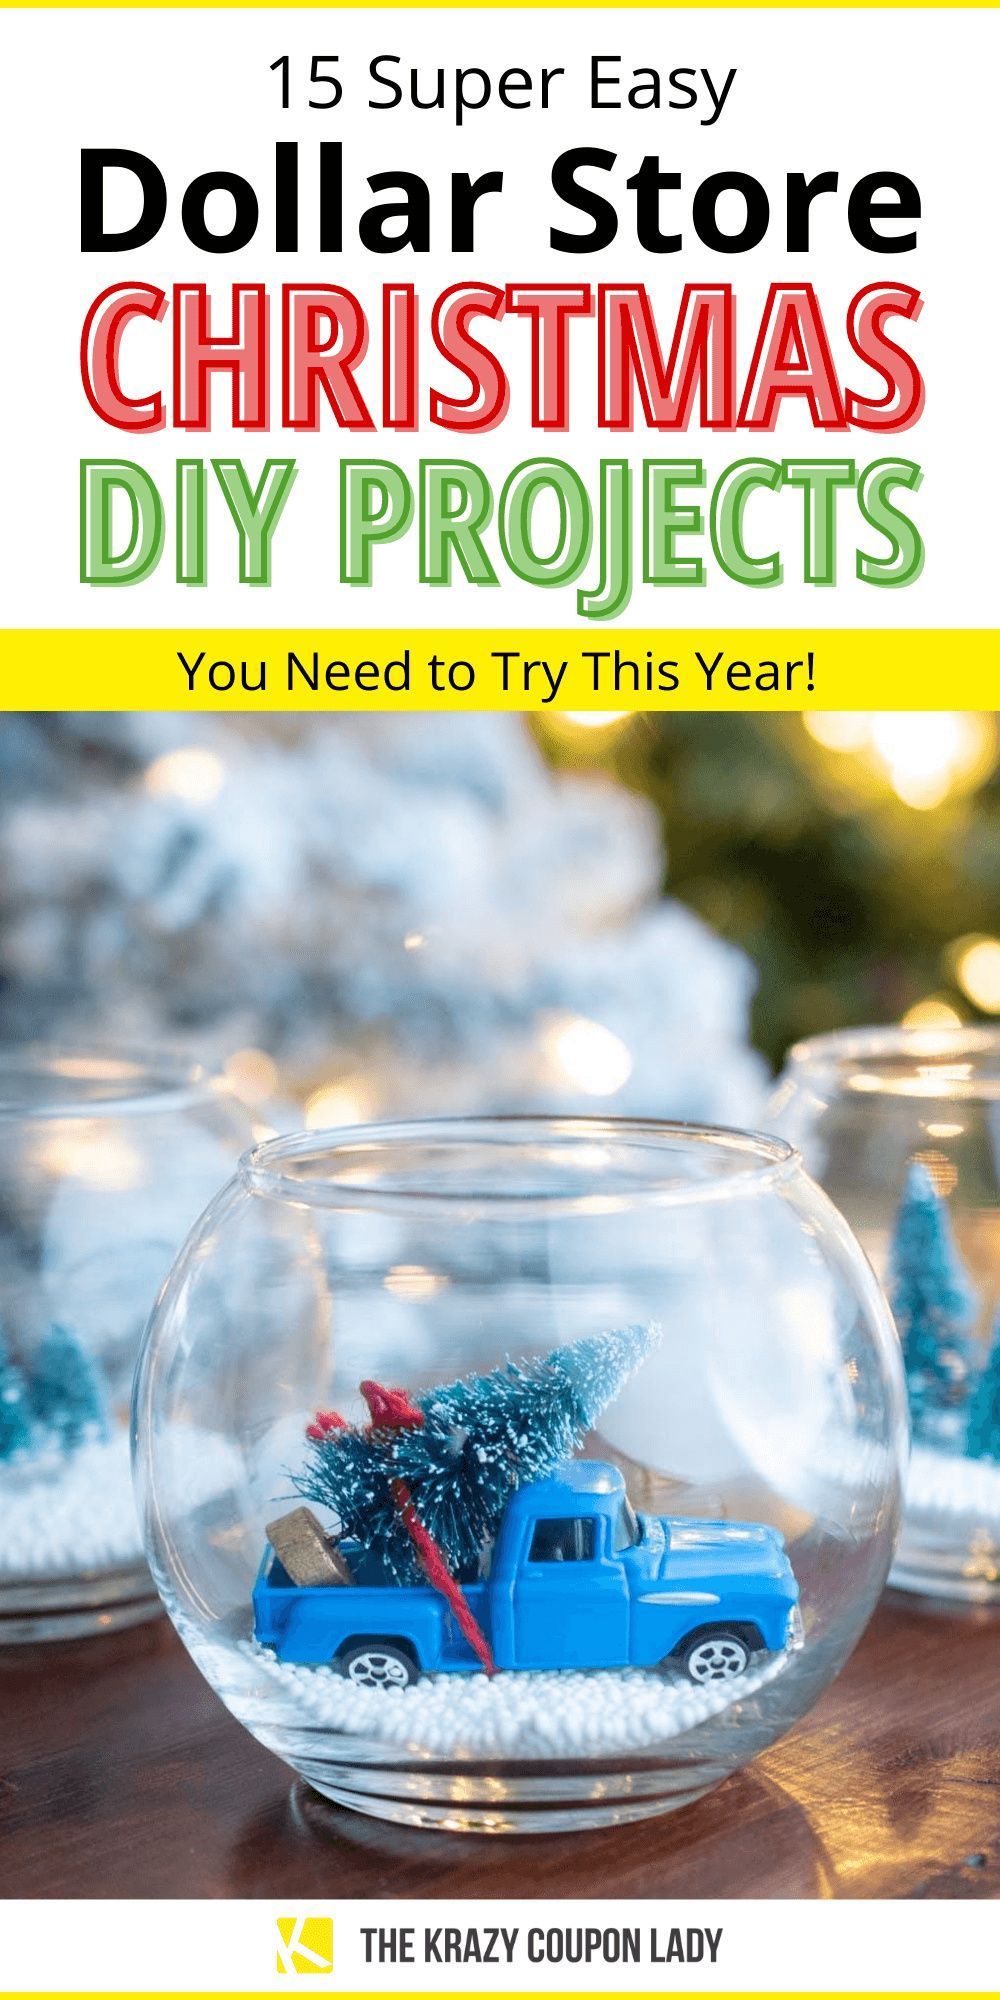 15 Dollar Store Christmas DIY Projects Anyone Can Do -   22 diy Projects christmas ideas